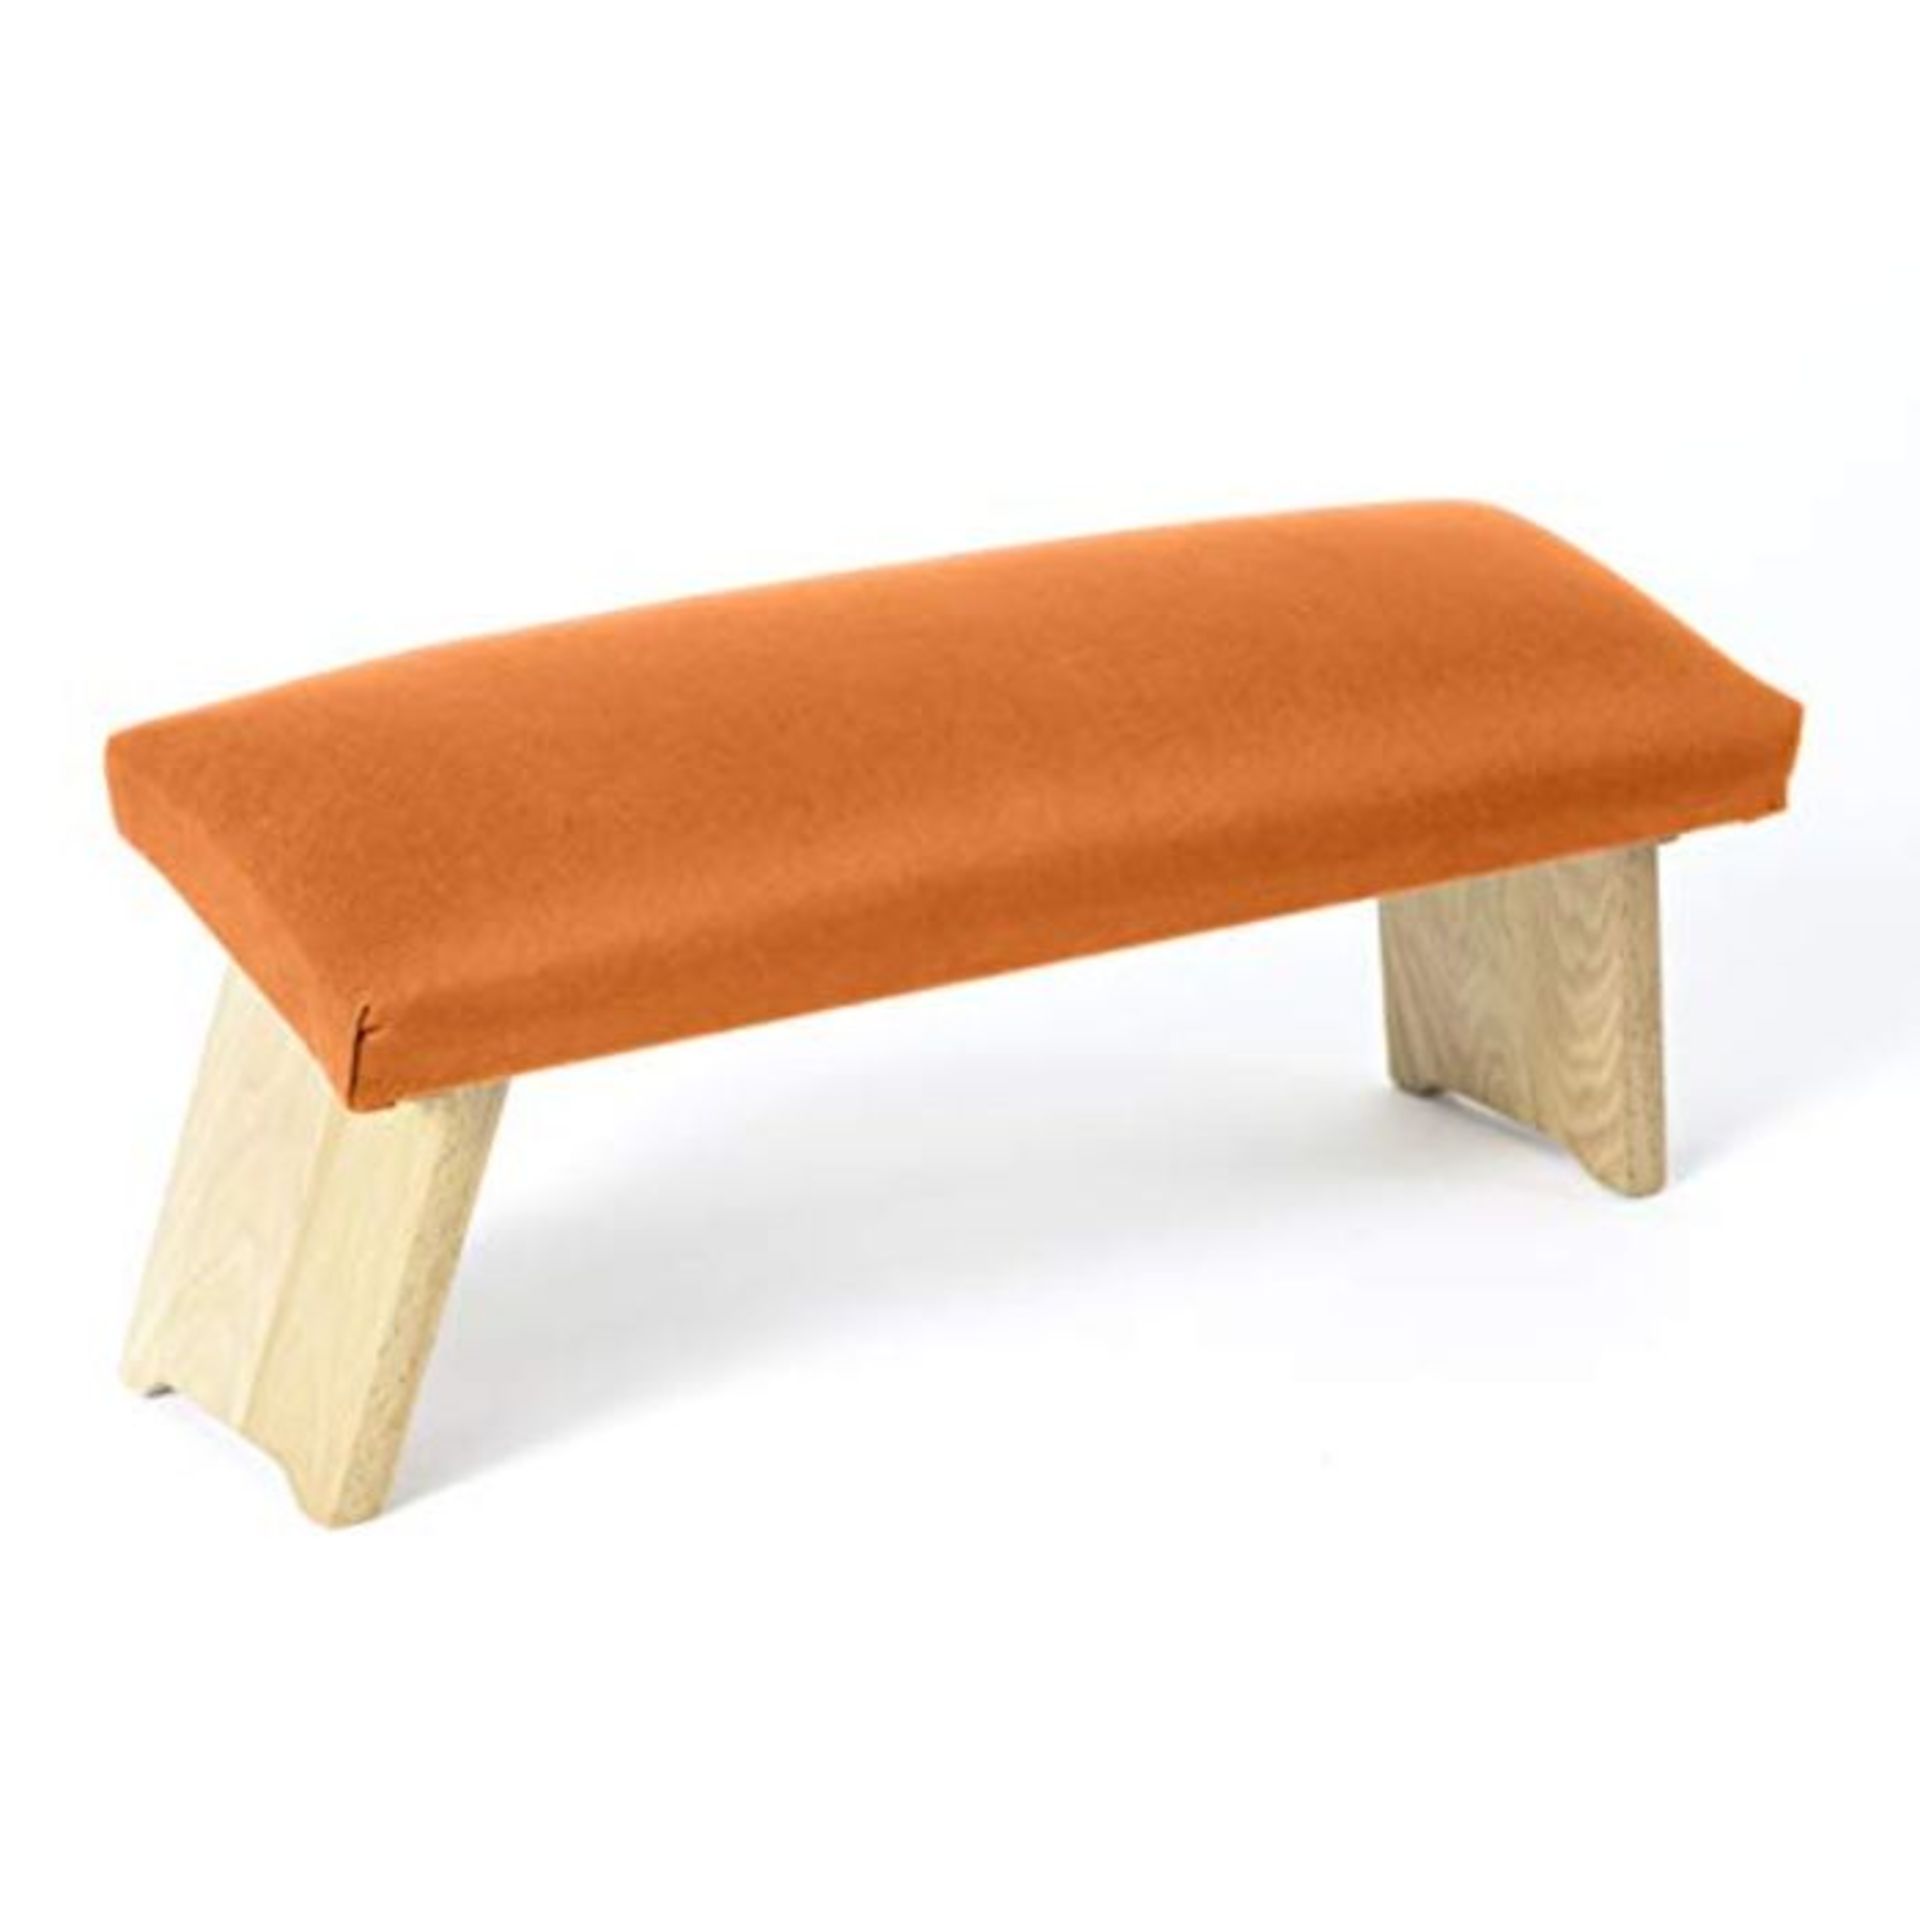 [CRACKED] Lotuscrafts Meditation Bench Dharma Foldable - Made in Europe - Yoga Benchto